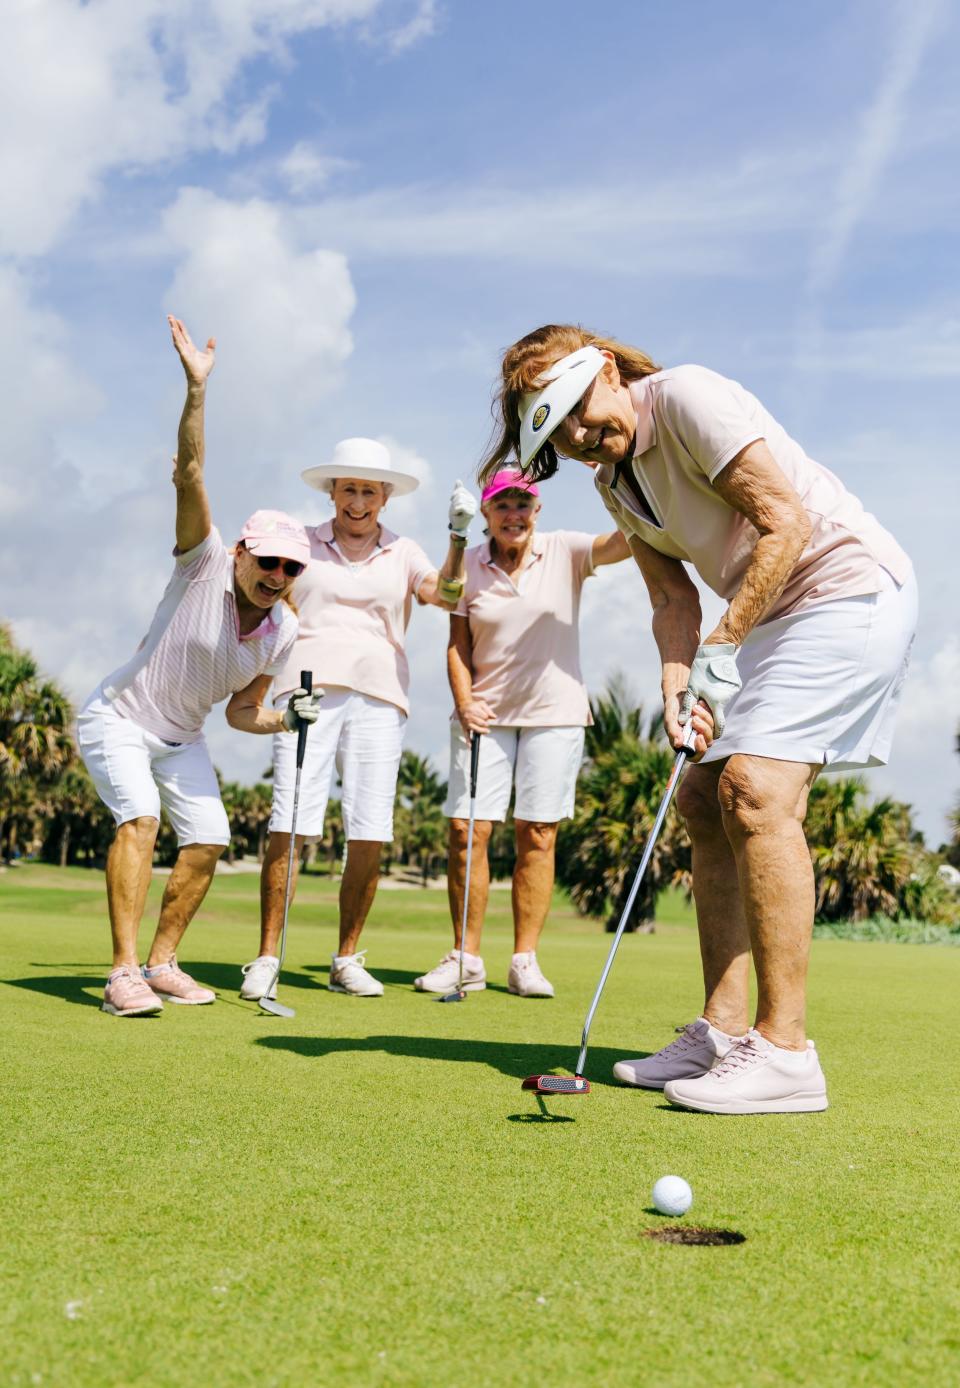 Palm Beach Gardens residents Maryanne Jones, Patti Collins and Sharyn Petillo cheer on Ronnie Stein,  as she putts during the seventh annual Literacy Links golf tournament April 14, 2023 at the Par 3 golf course in Palm Beach.